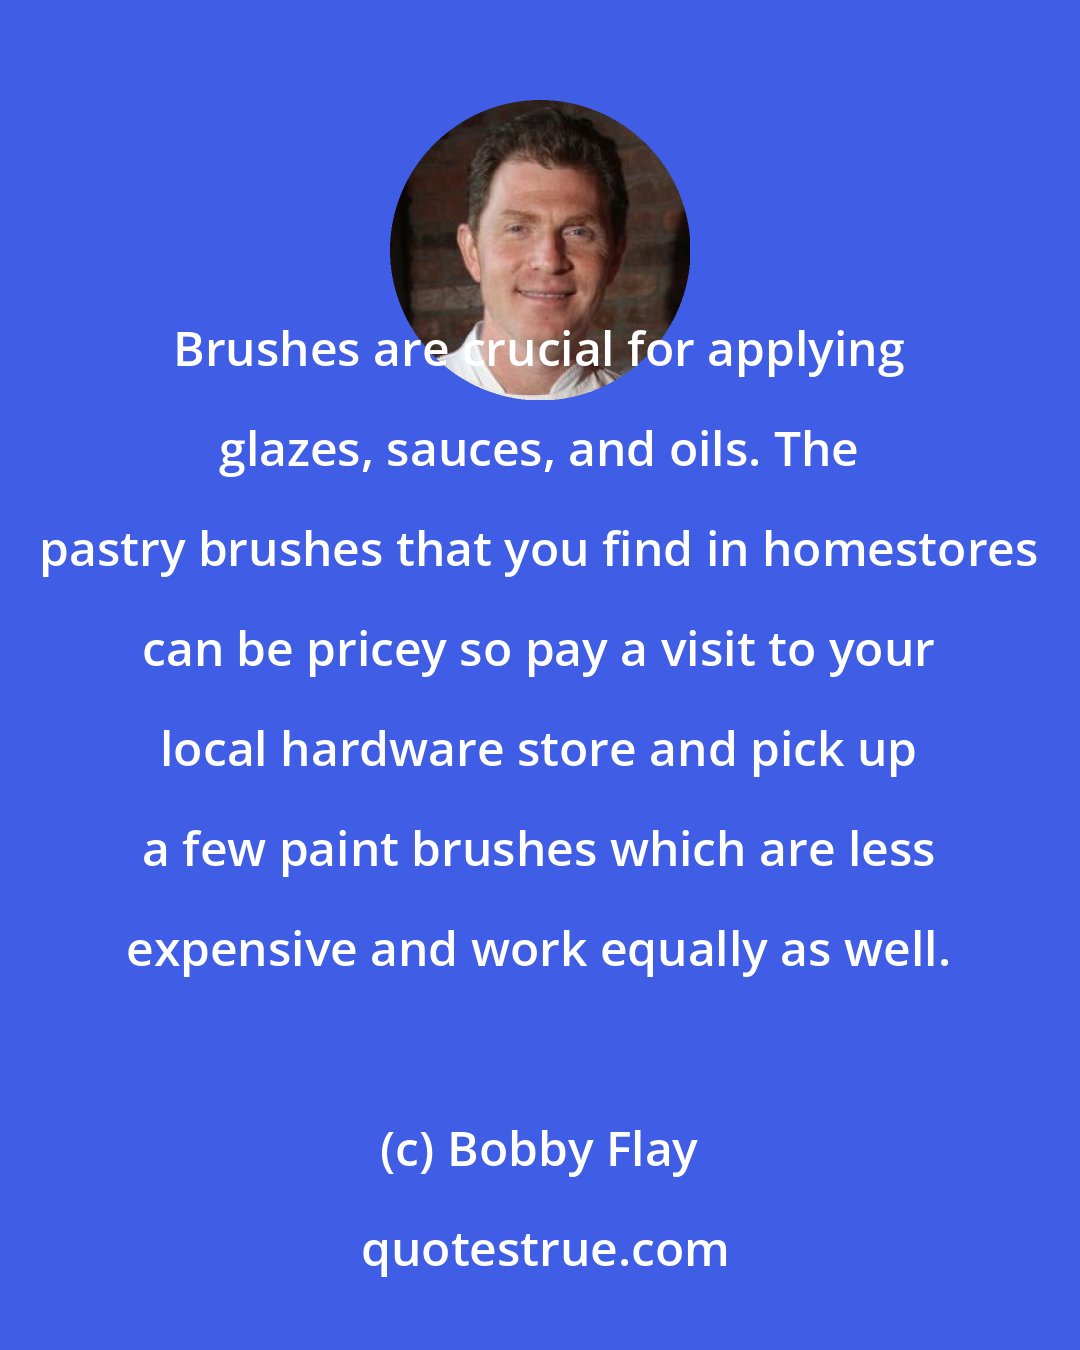 Bobby Flay: Brushes are crucial for applying glazes, sauces, and oils. The pastry brushes that you find in homestores can be pricey so pay a visit to your local hardware store and pick up a few paint brushes which are less expensive and work equally as well.